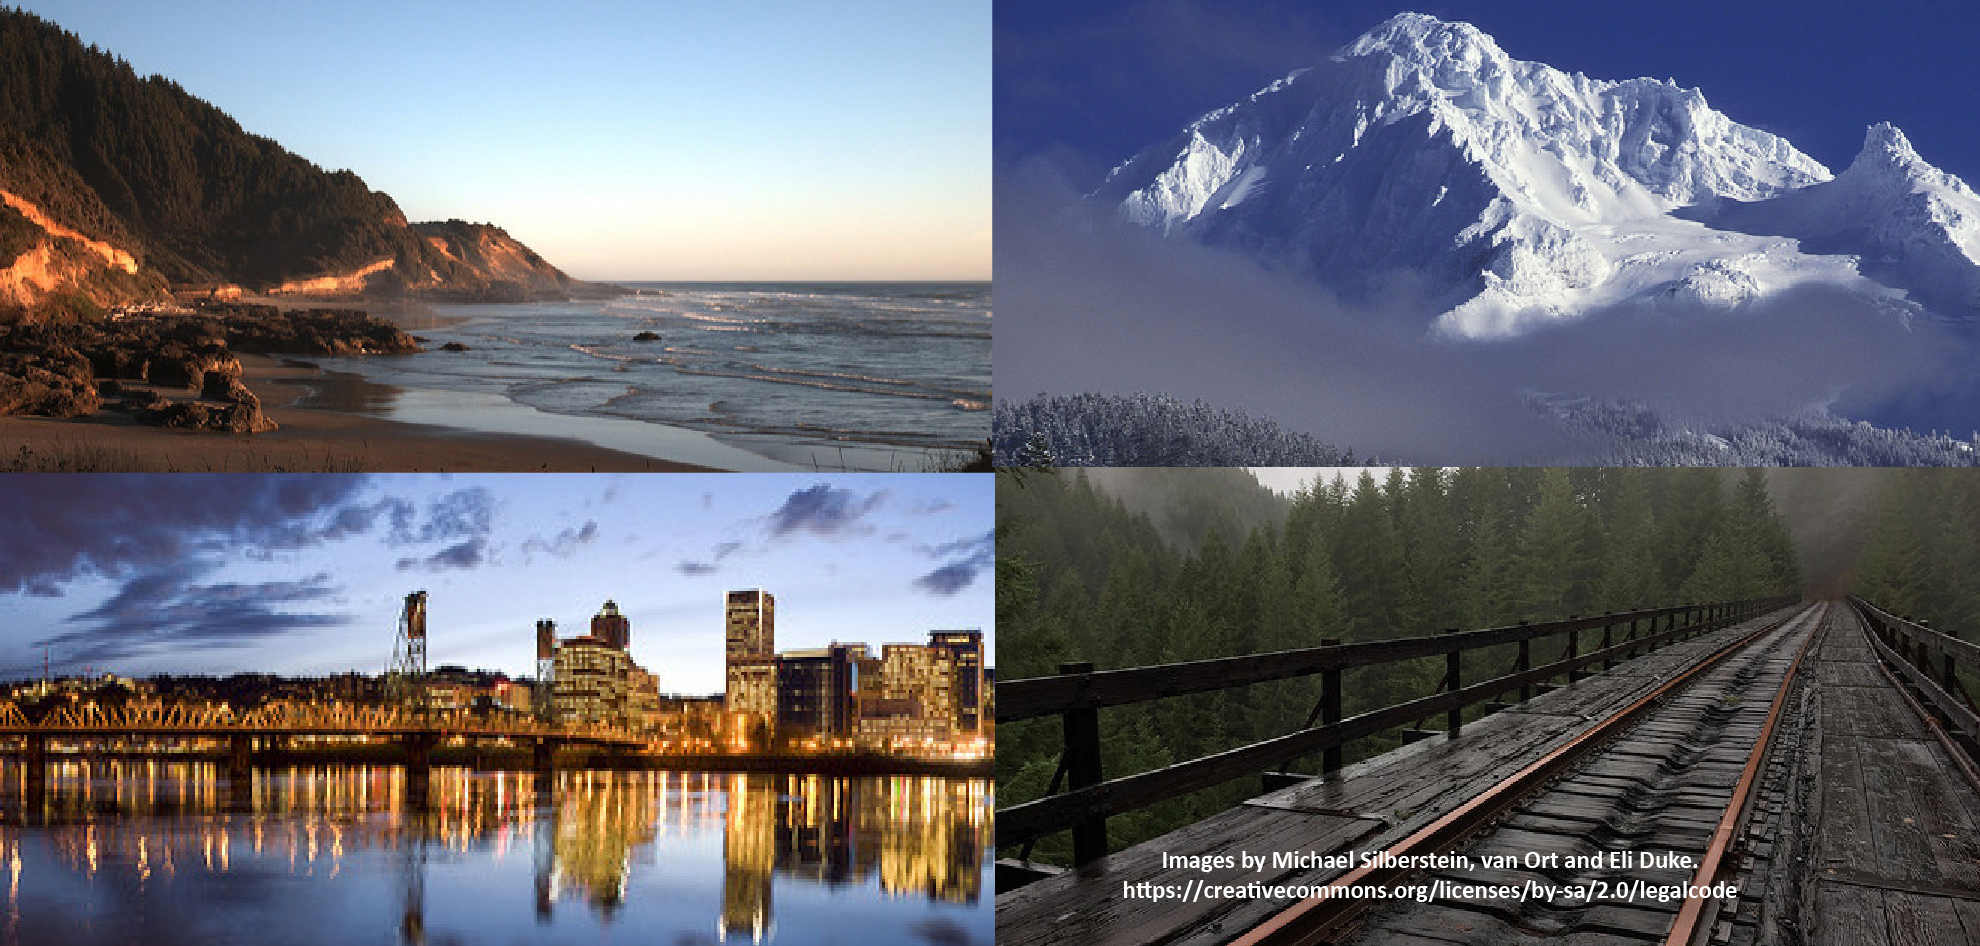 Images from Oregon, including the Ocean, the city of Portland, railroad tracks and Mt. Hood.